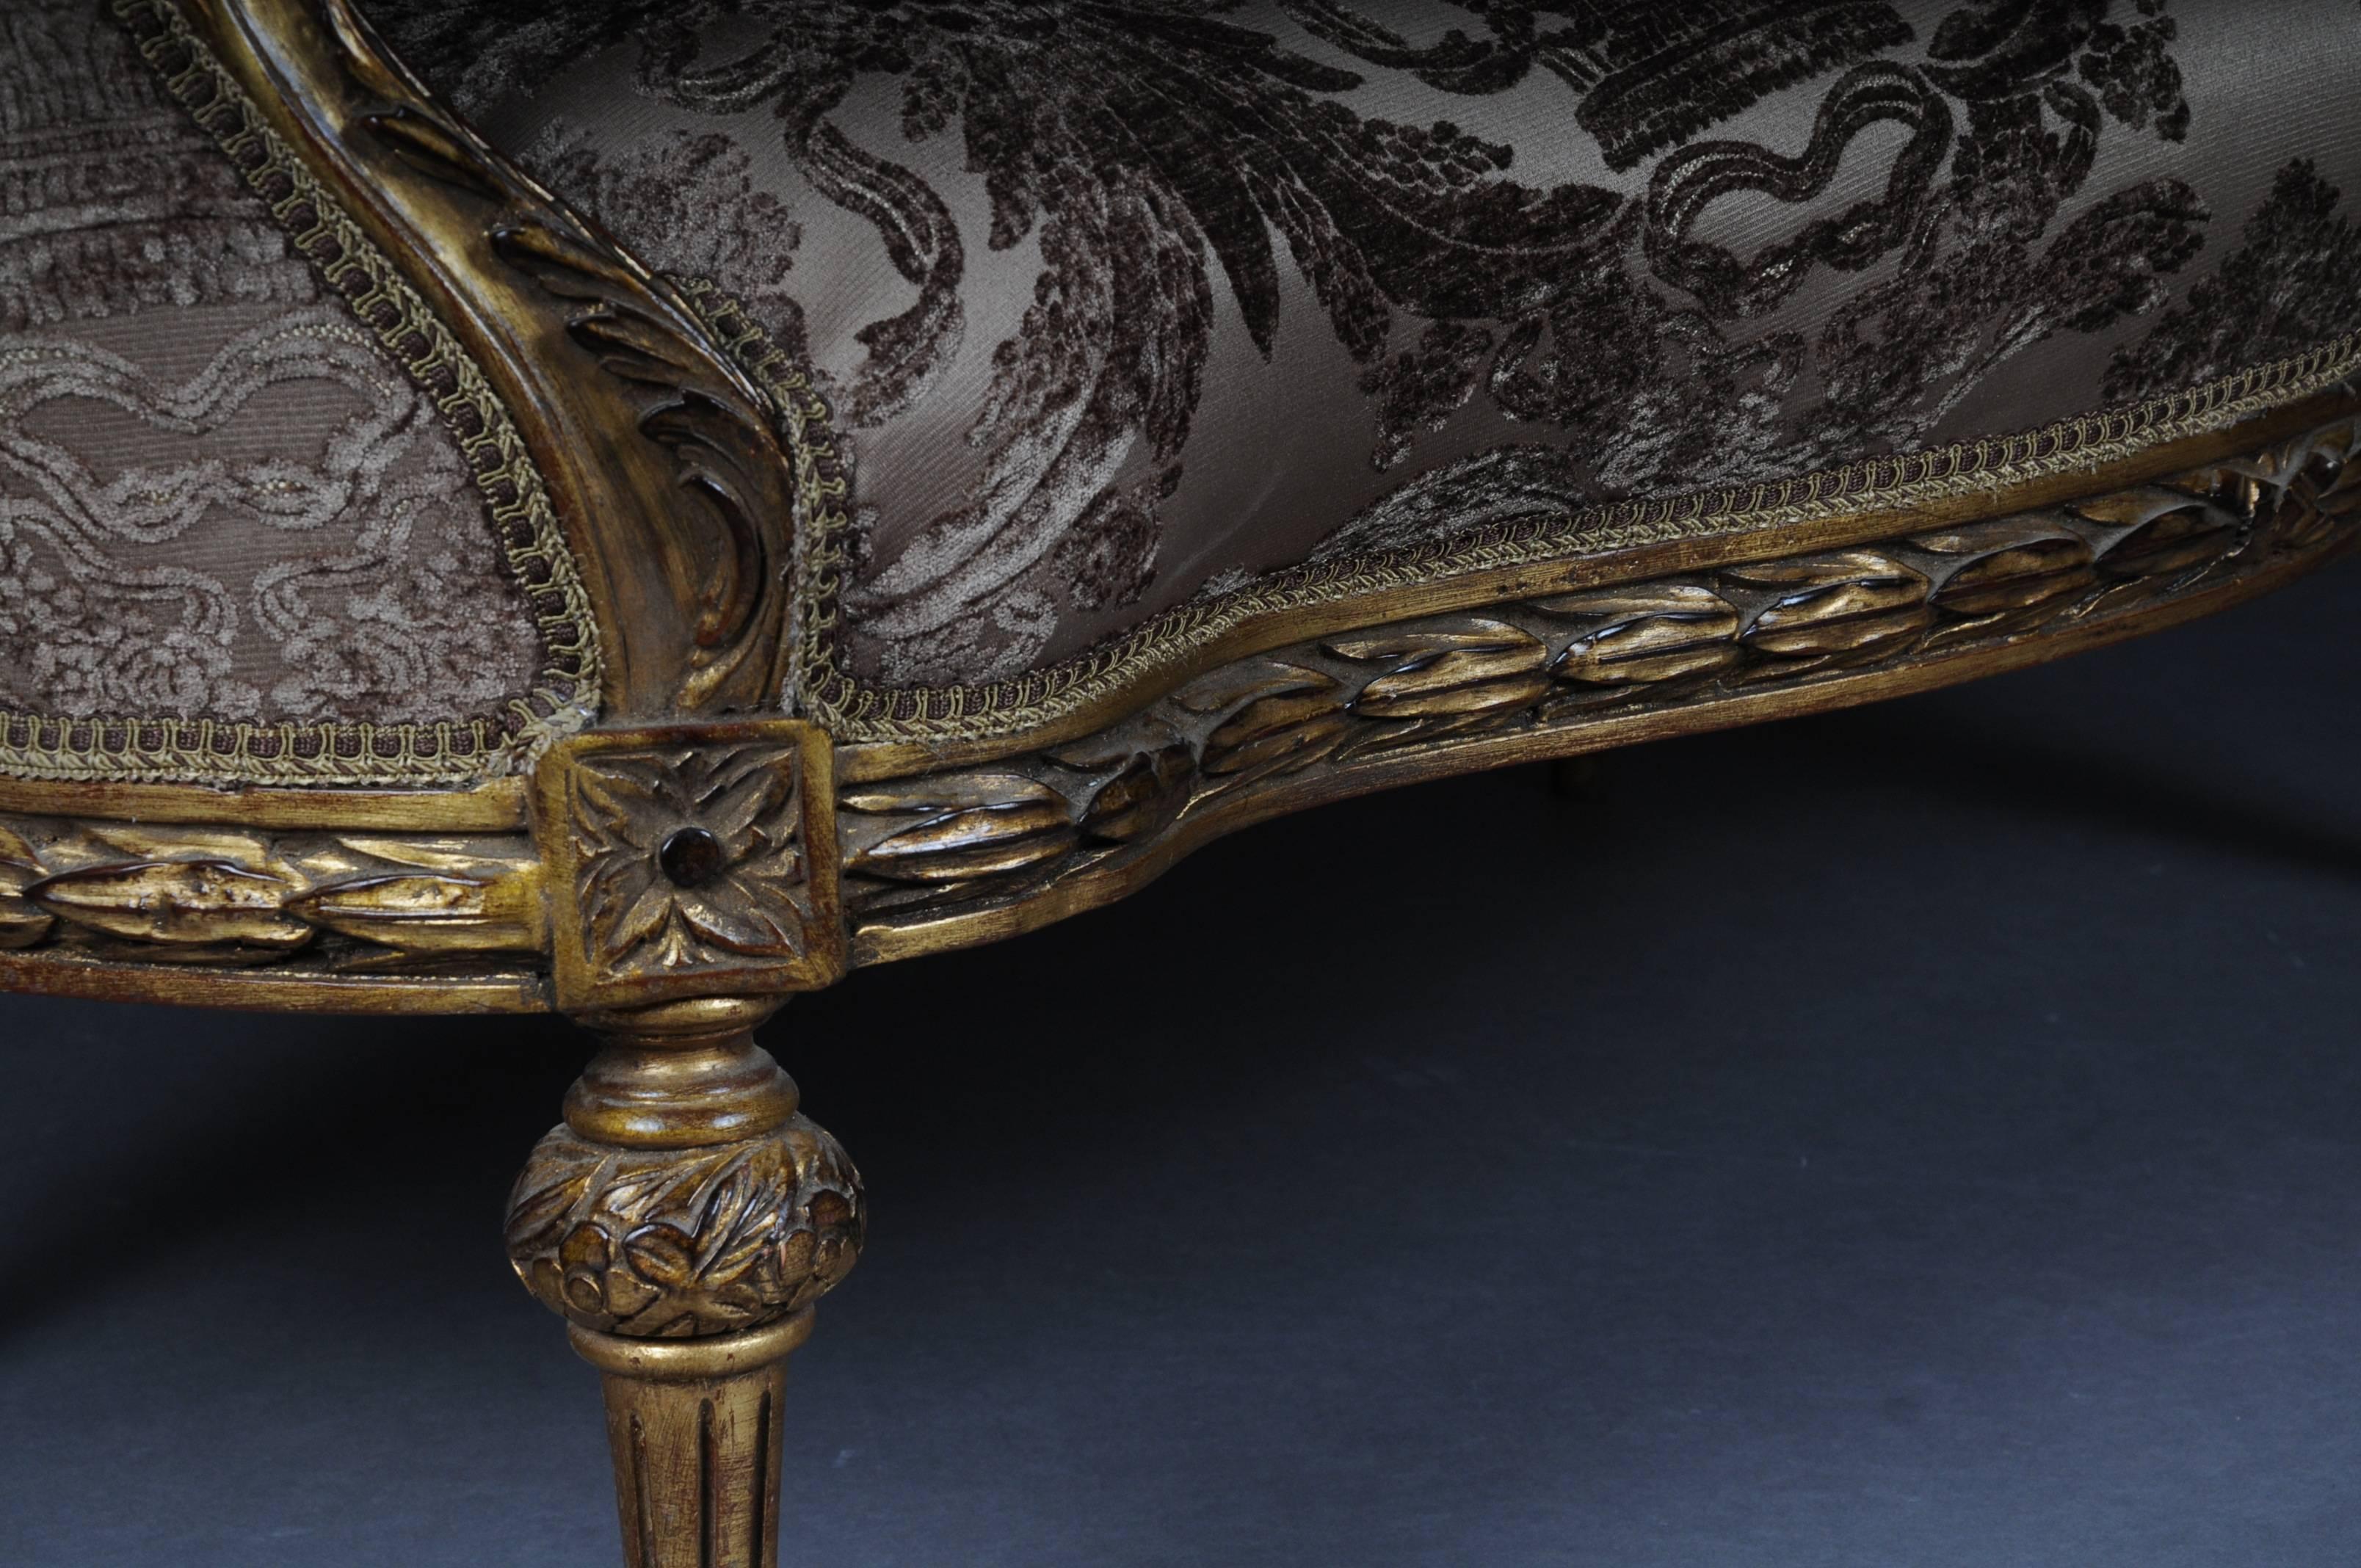 Decorative French Sofa, Canapé in Louis XVI Seize For Sale 4